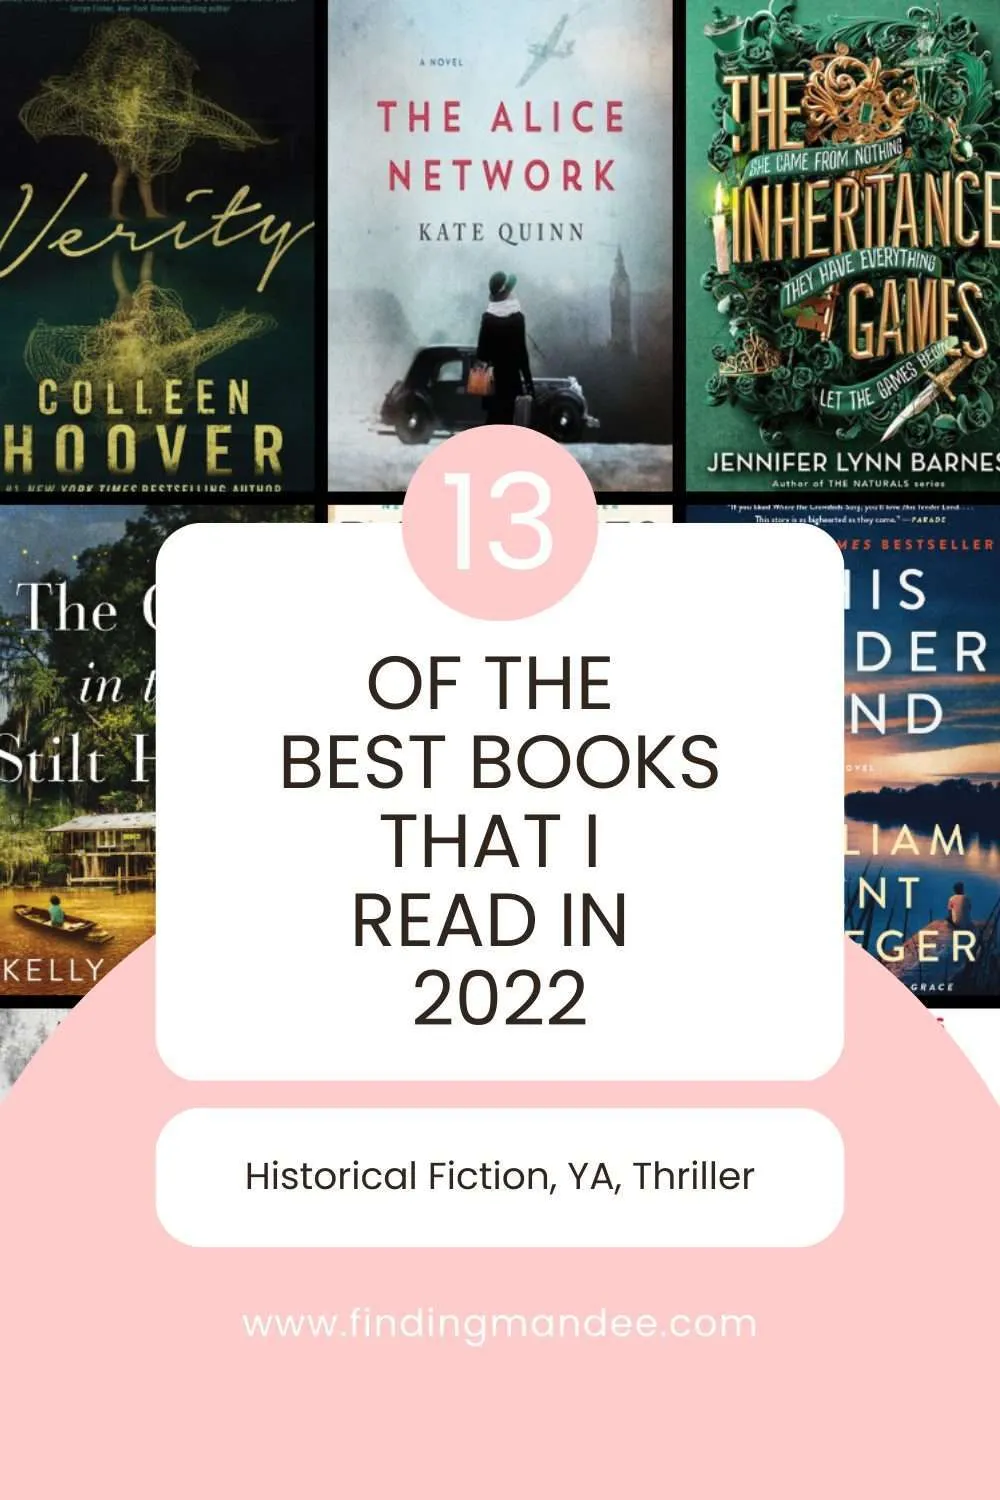 13 of the Best Books That I Read in 2022 | Finding Mandee